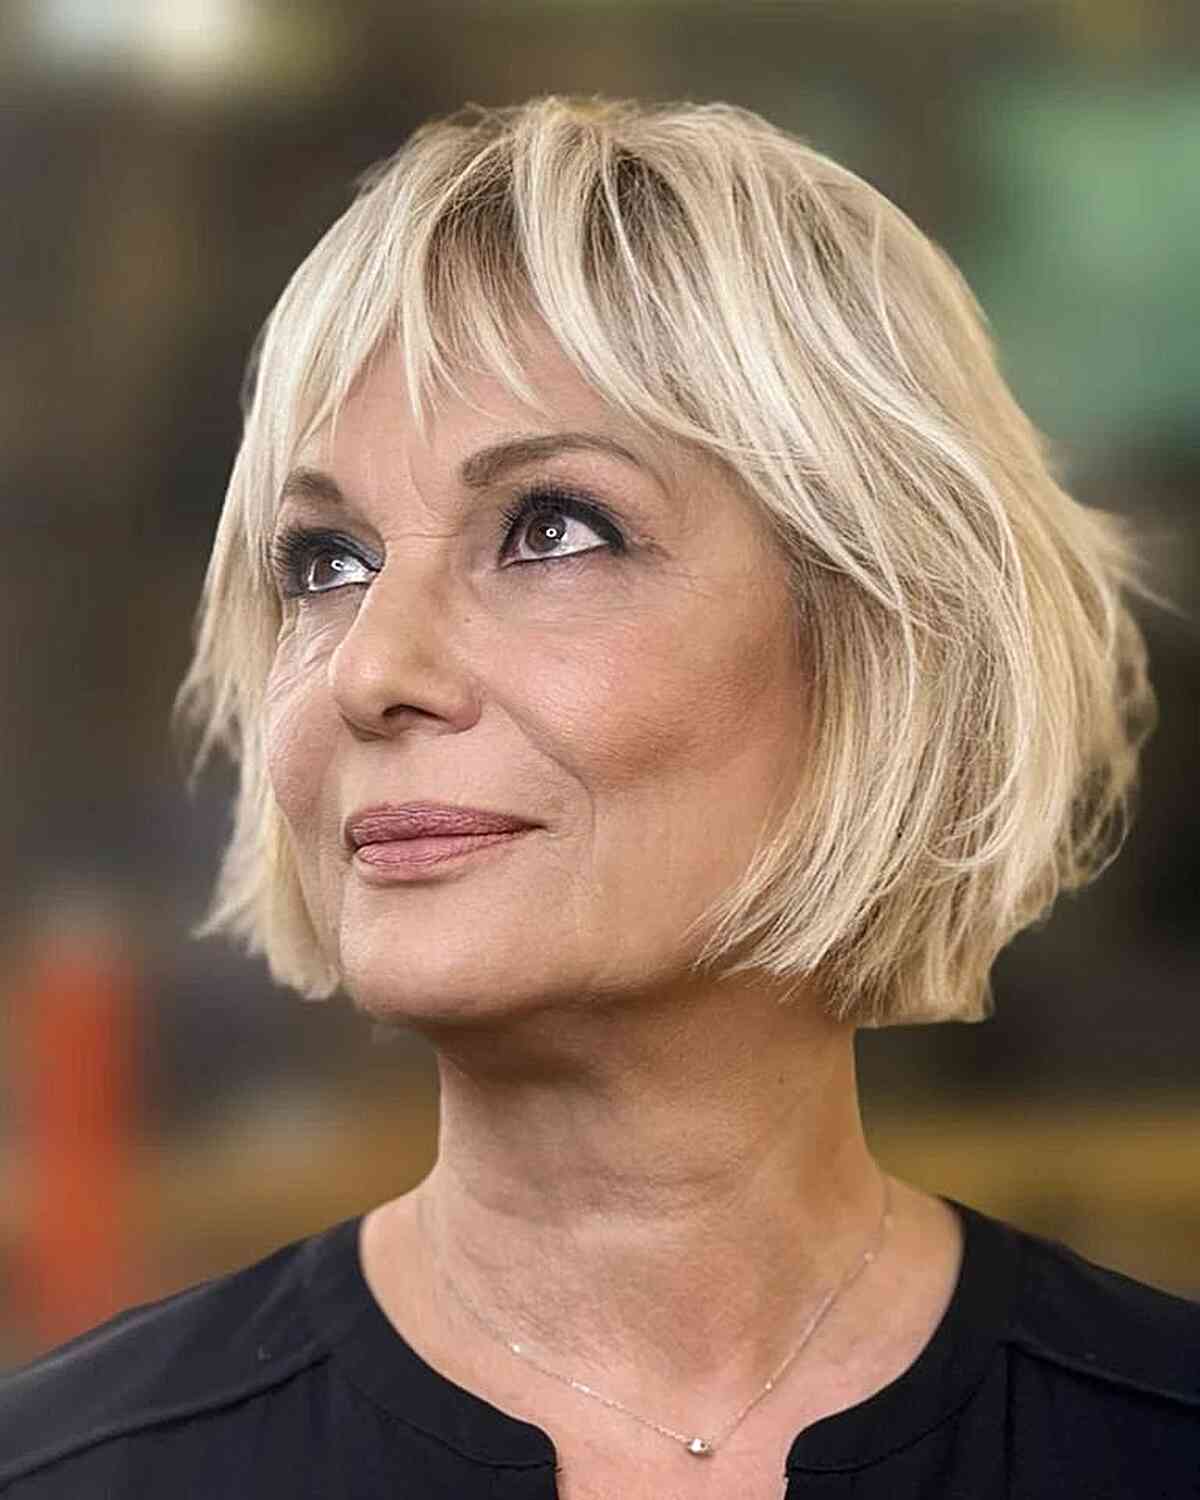 Chin-Length Choppy Crop with Bangs for Ladies in their 60s